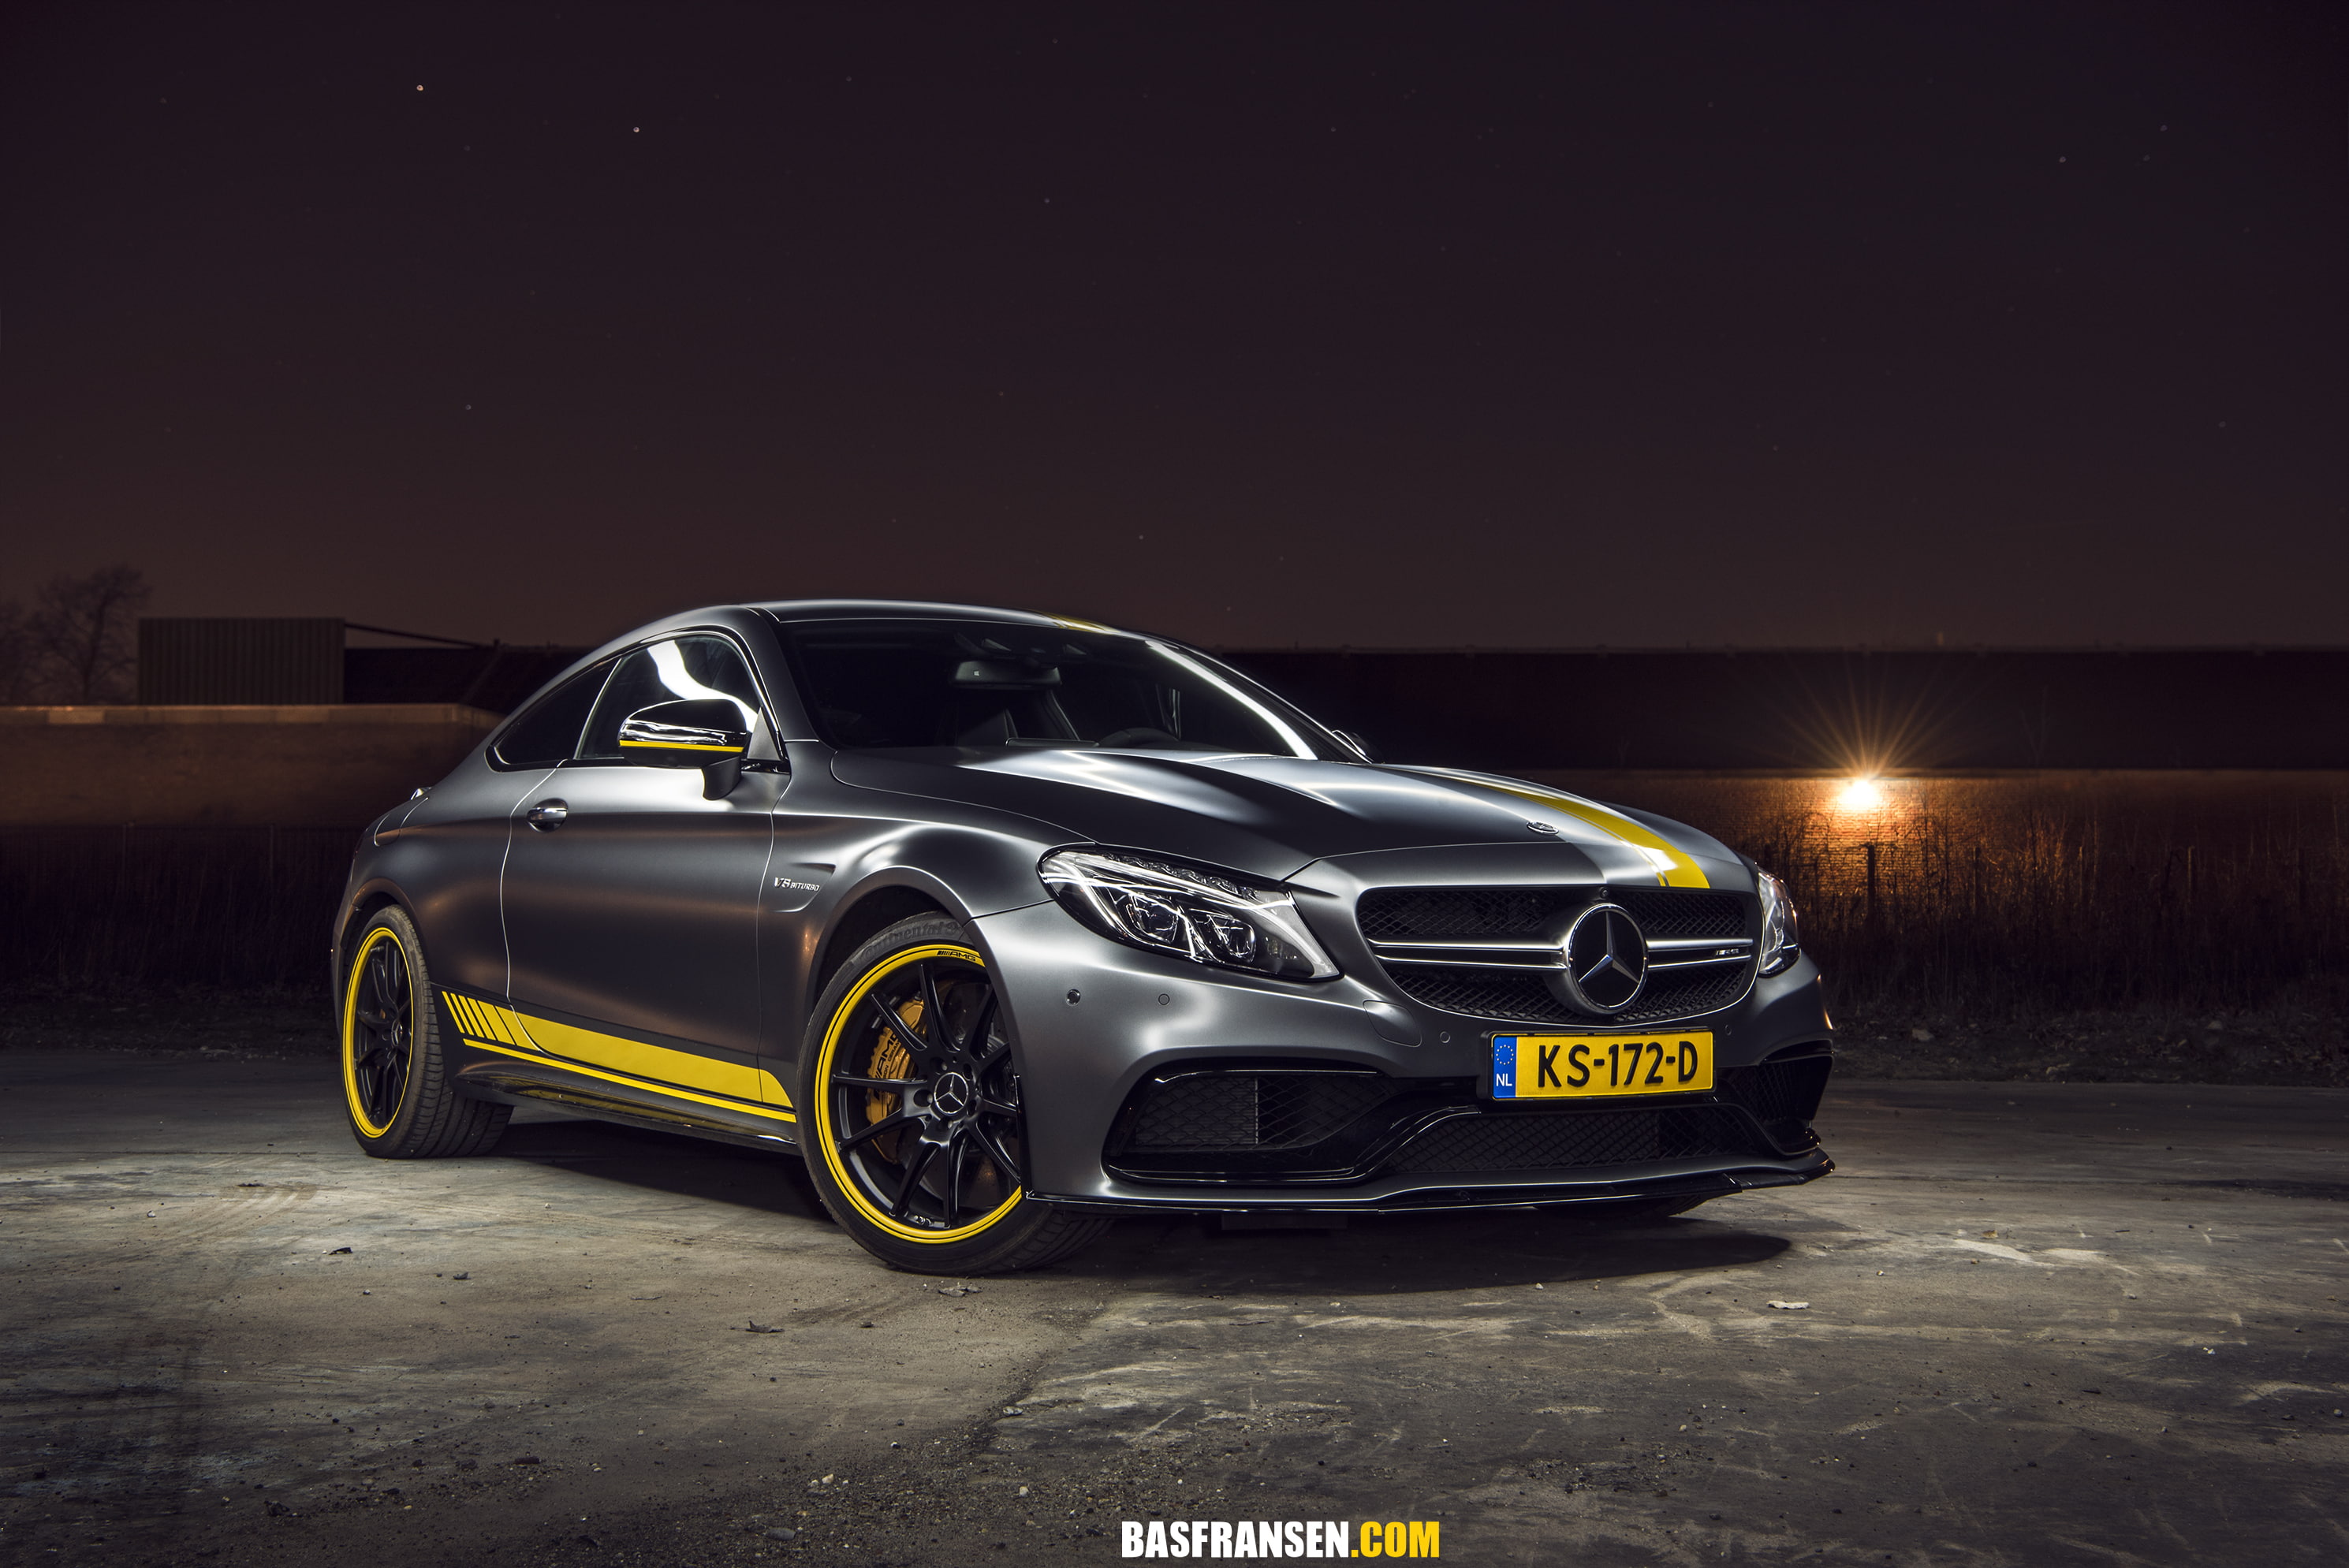 silver and yellow Mercedes-Benz coupe parked on concrete ground